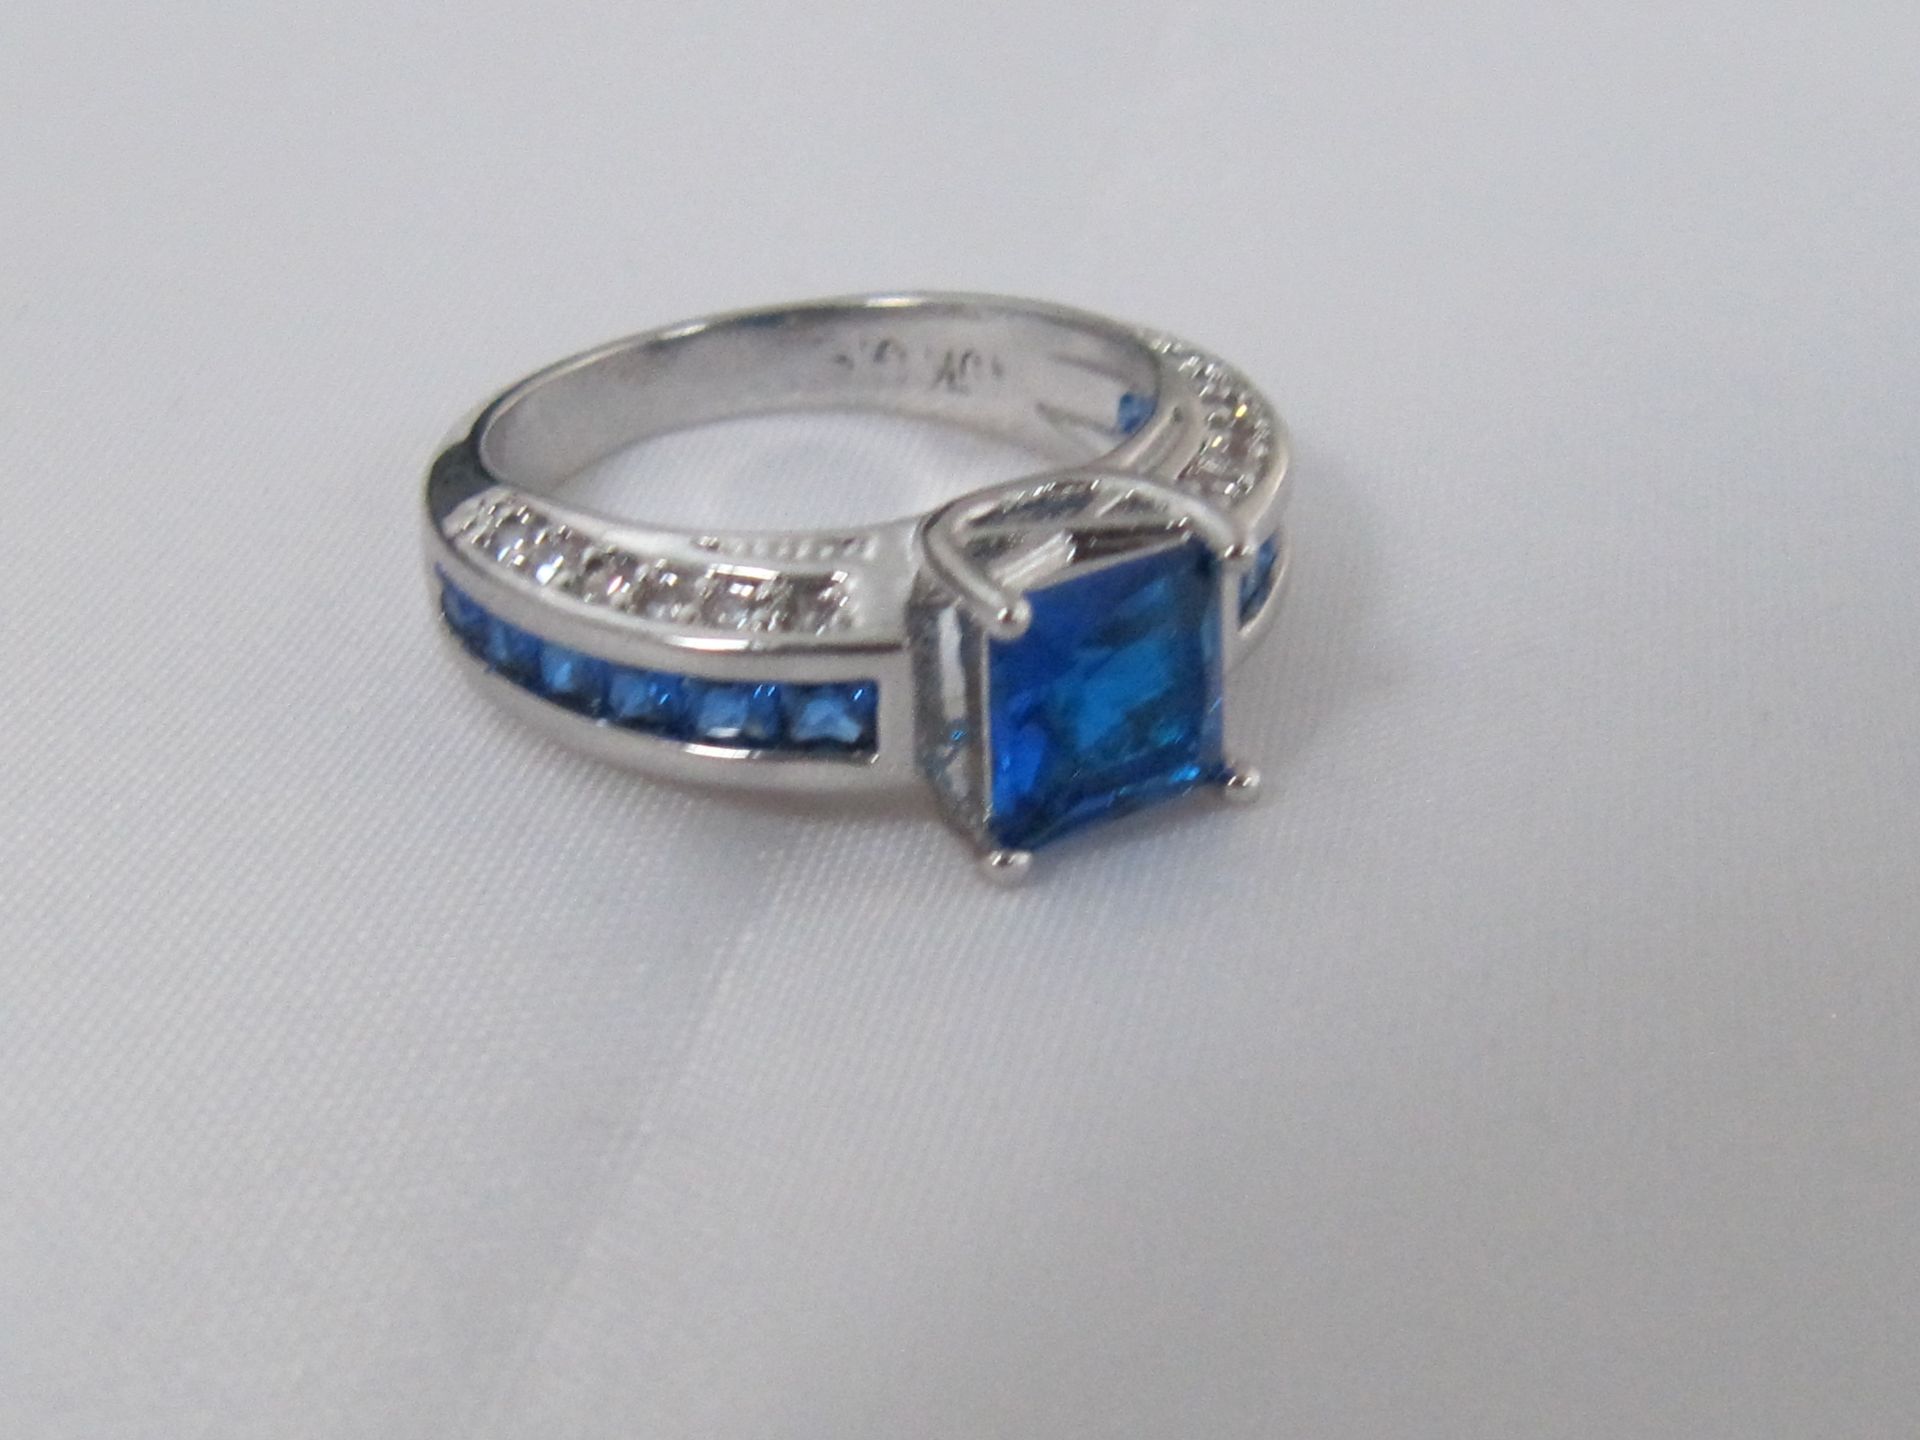 10k White Gold Filled with Blue Sapphires. Size S. - Image 5 of 5